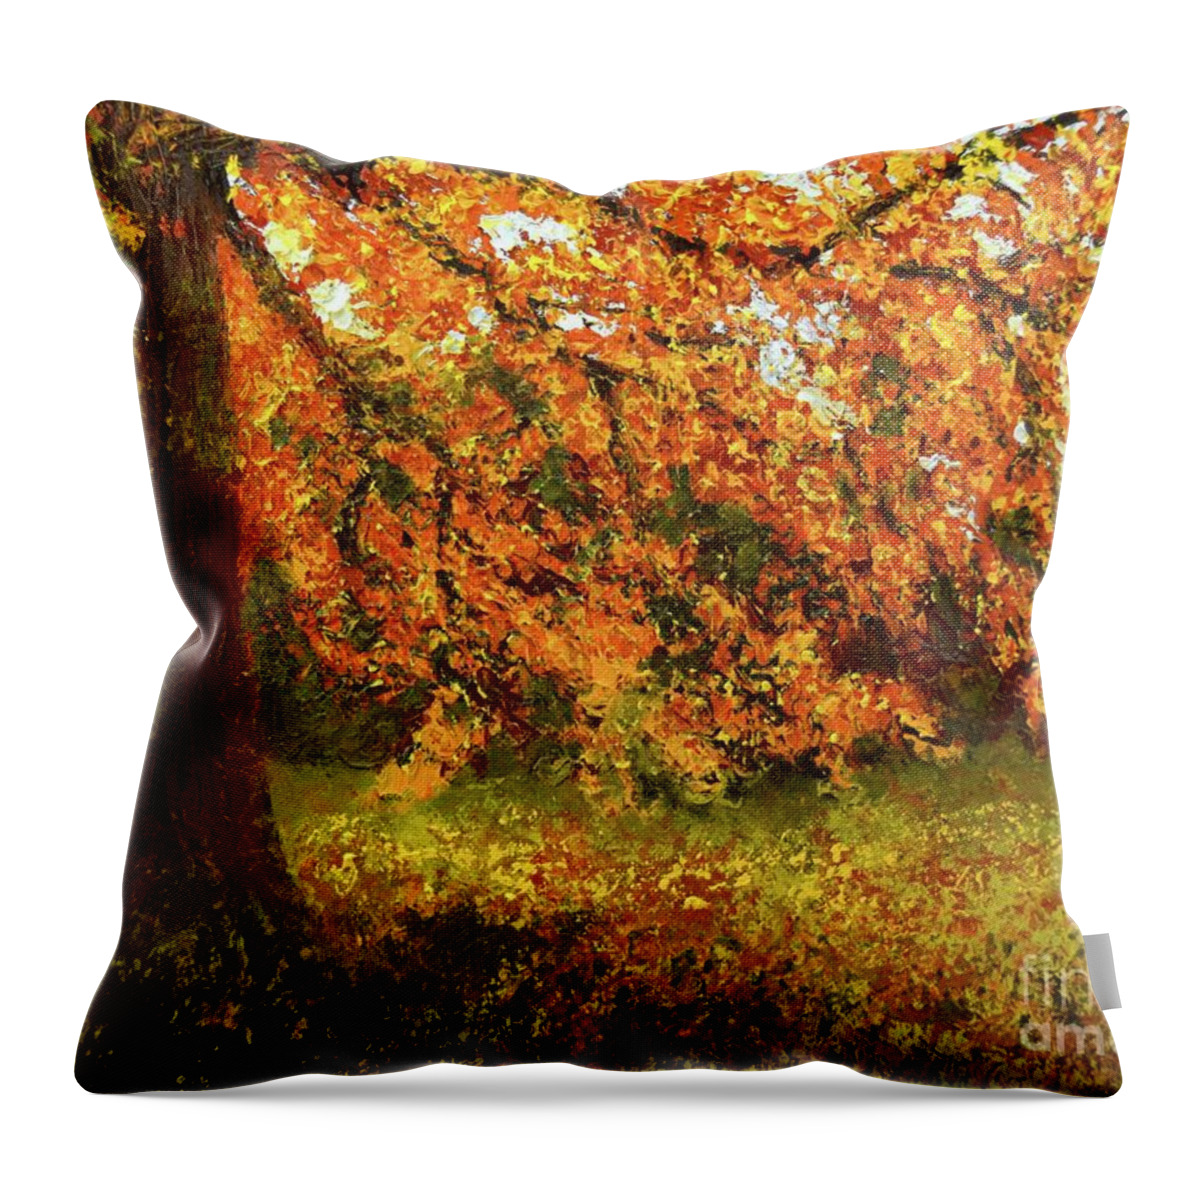  Throw Pillow featuring the painting Shady Oak by Barrie Stark